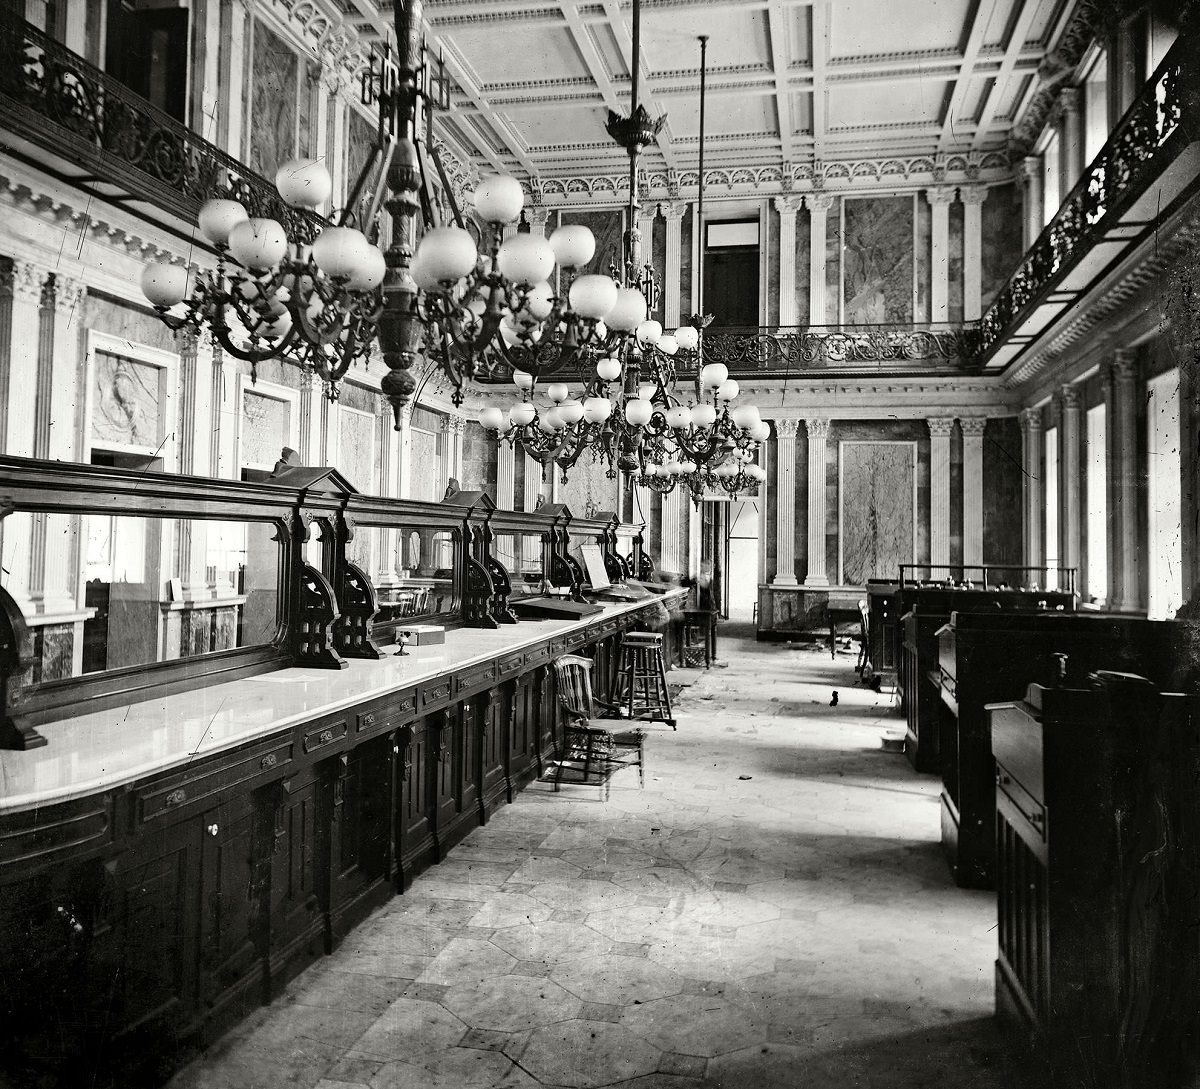 Treasury Department in Lincoln's time (Cash Room behind the desks)." At least two spectral presences here. Civil War glass negative collection, Washington, D.C., 1863.